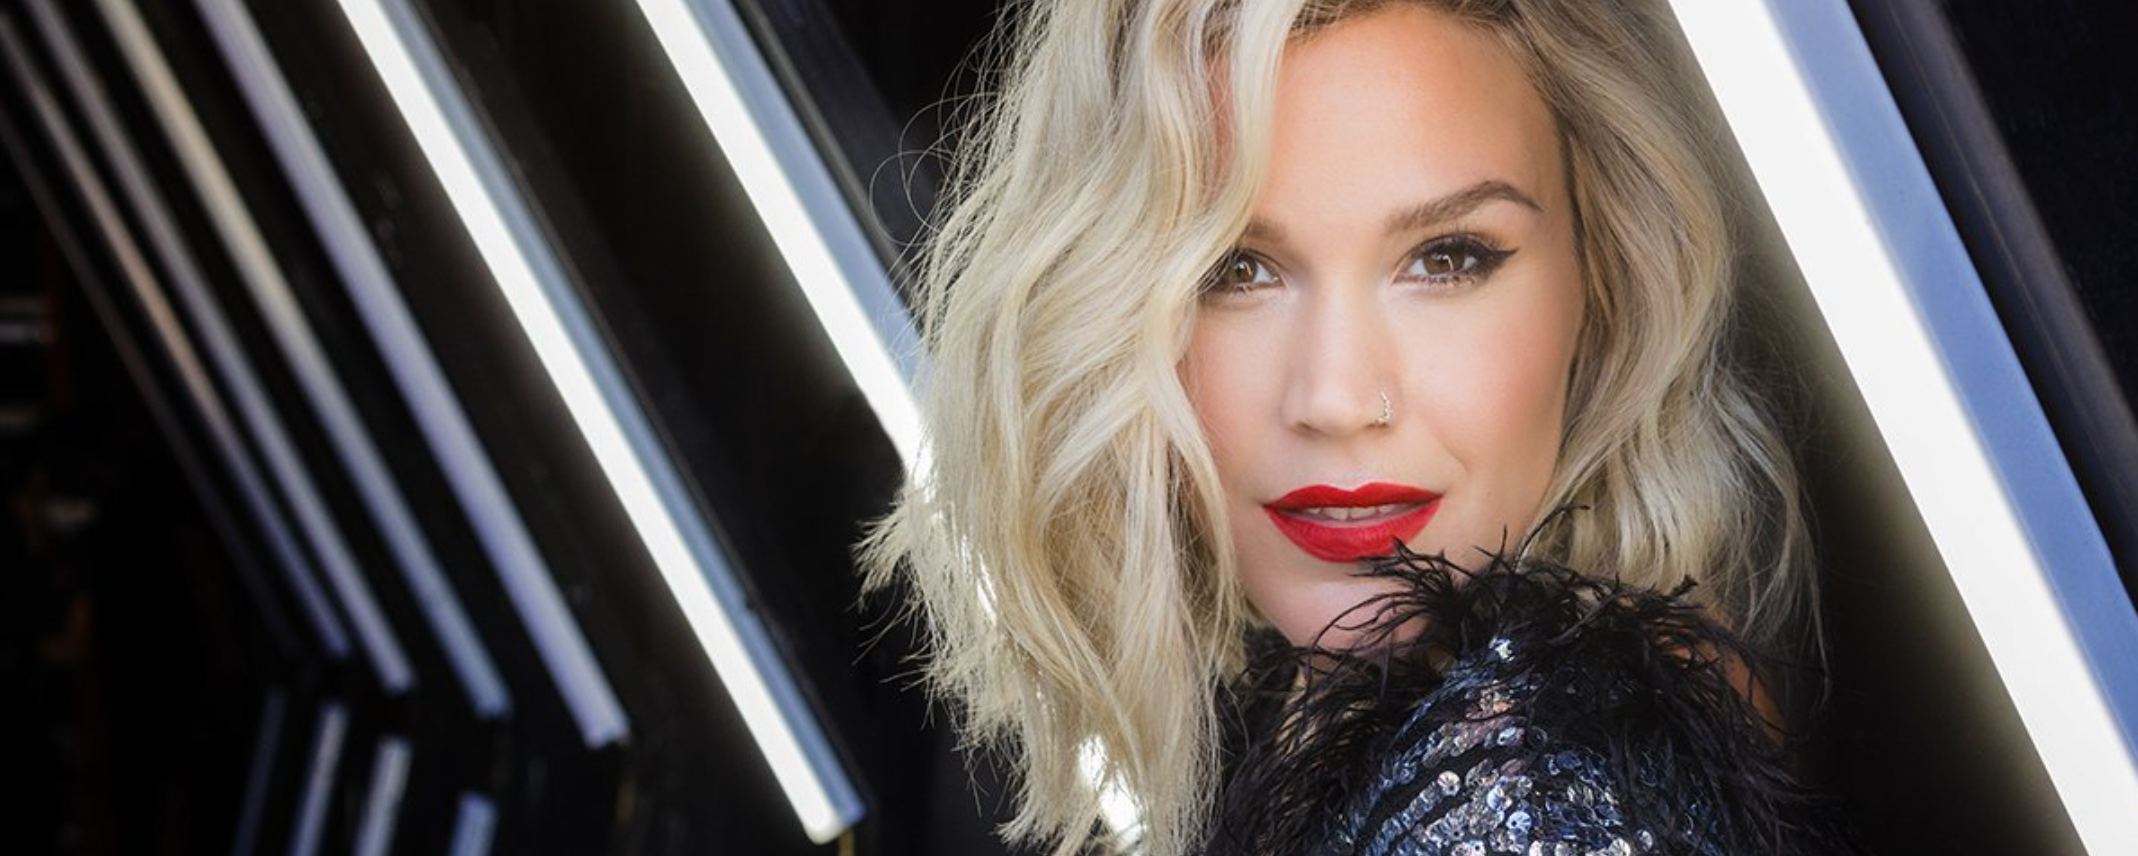 Joss Stone Returns With New Single, Announces First New Full-Length LP Since 2015